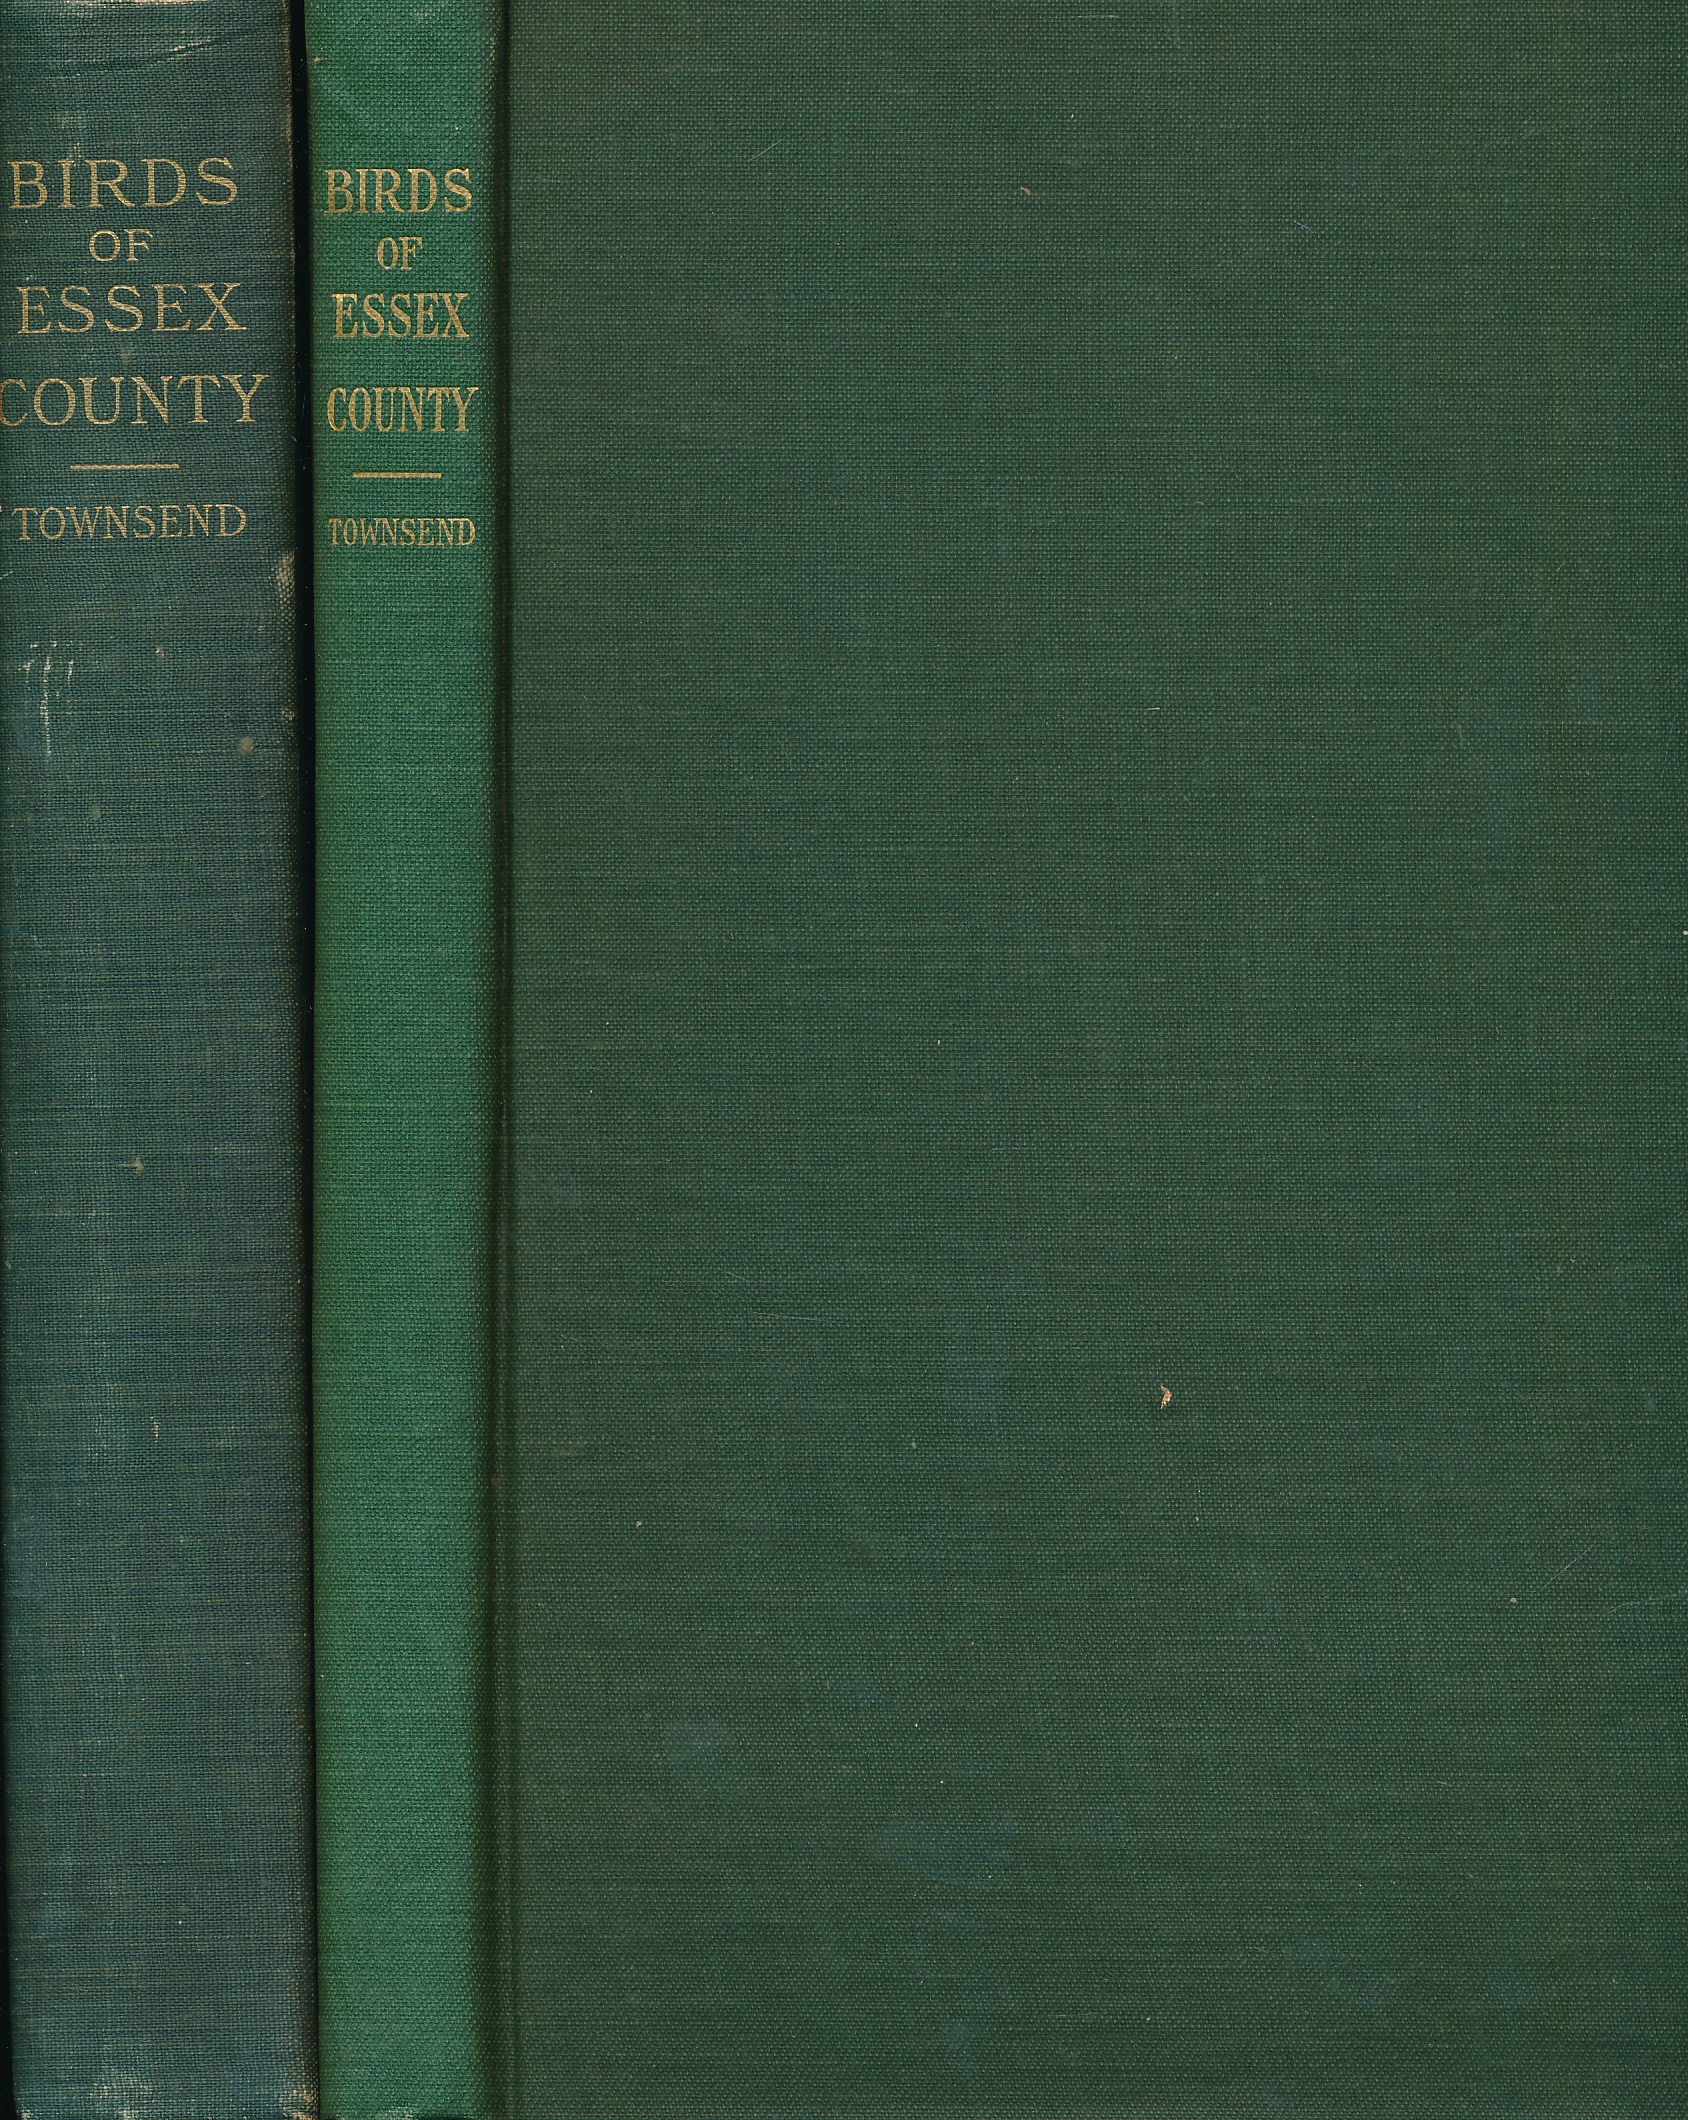 The Birds of Essex County, Massachusetts [with] Supplement  to The Birds of Essex County Massachusetts. 2 vol set.